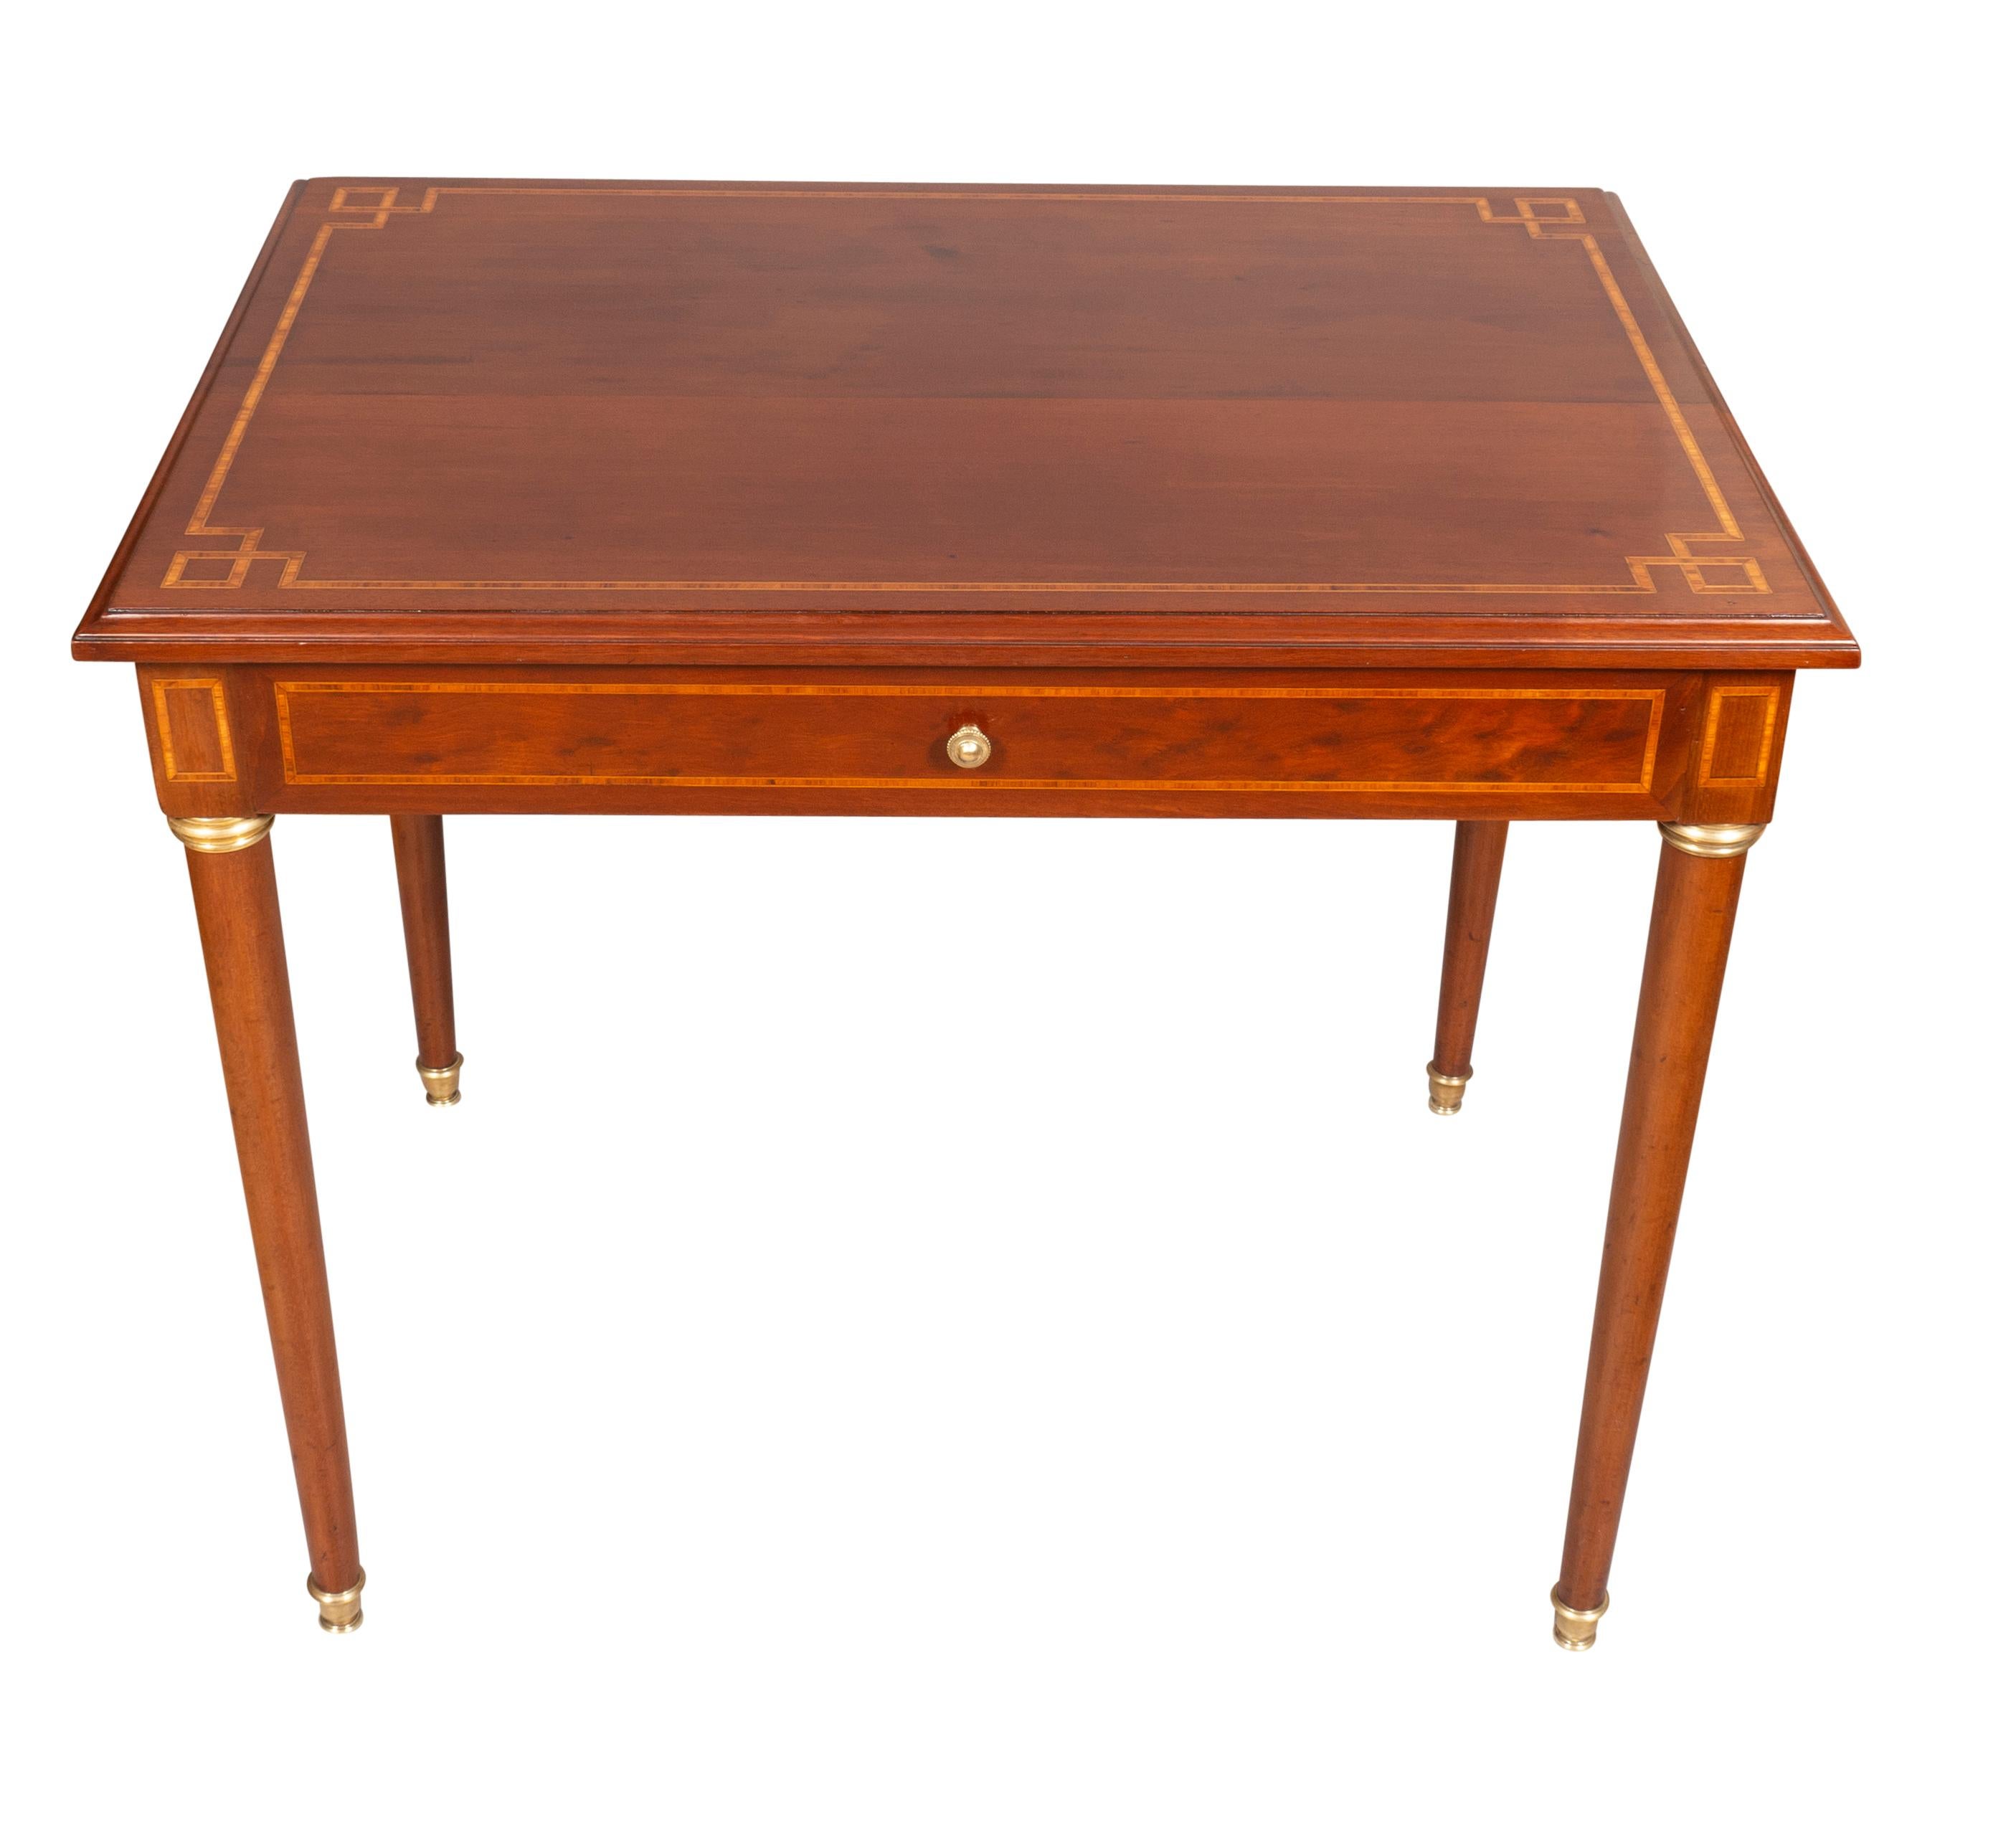 Rectangular top with inlaid border over a single long drawer and circular tapered legs headed by brass cuffs. Sabot feet.